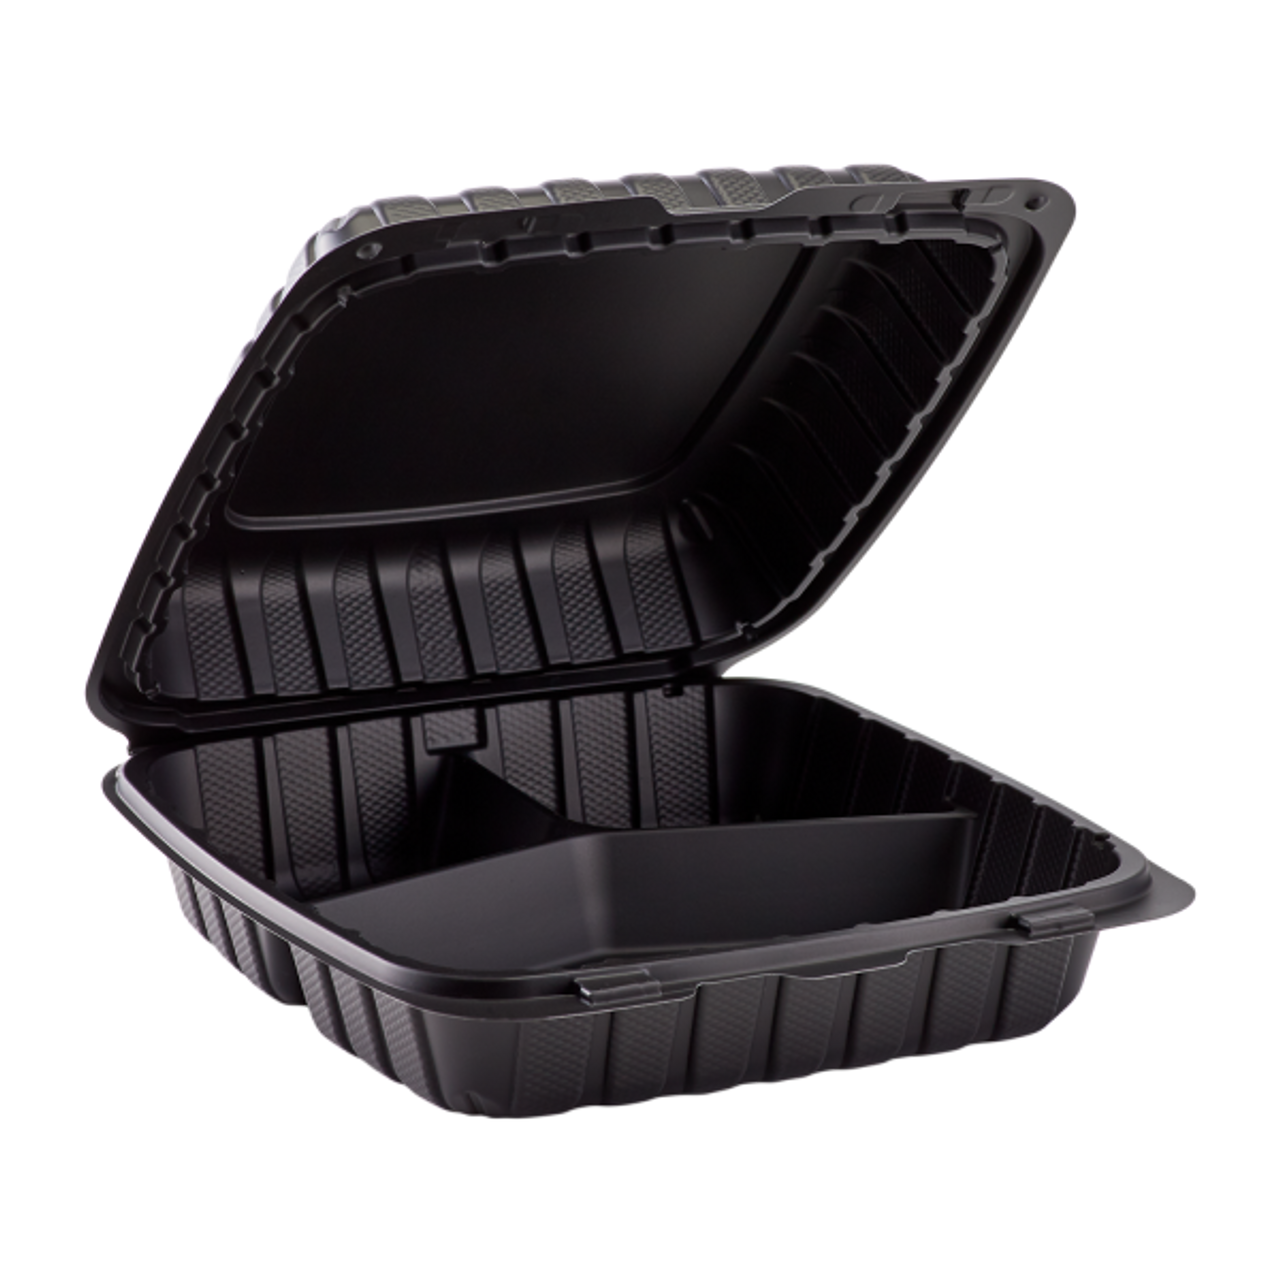  9 x 9 x 3 MFPP 3 Compartment Hinged Take Out Container -Black - Case of 150